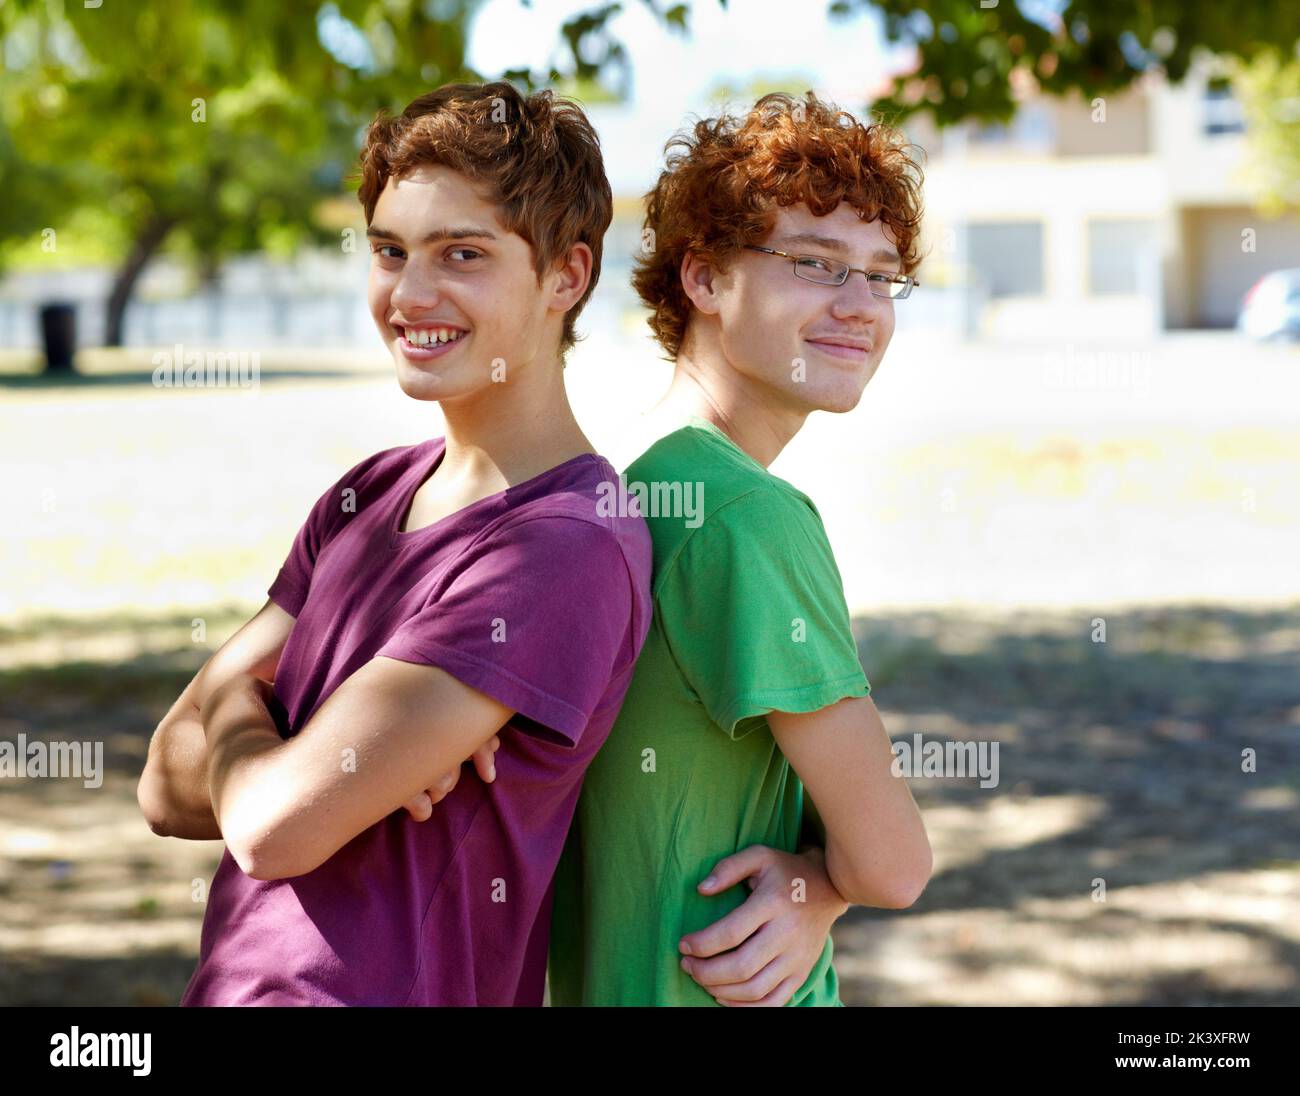 Hes got my back. Portrait of two boys standing back to back outdoors on a sunny day. Stock Photo